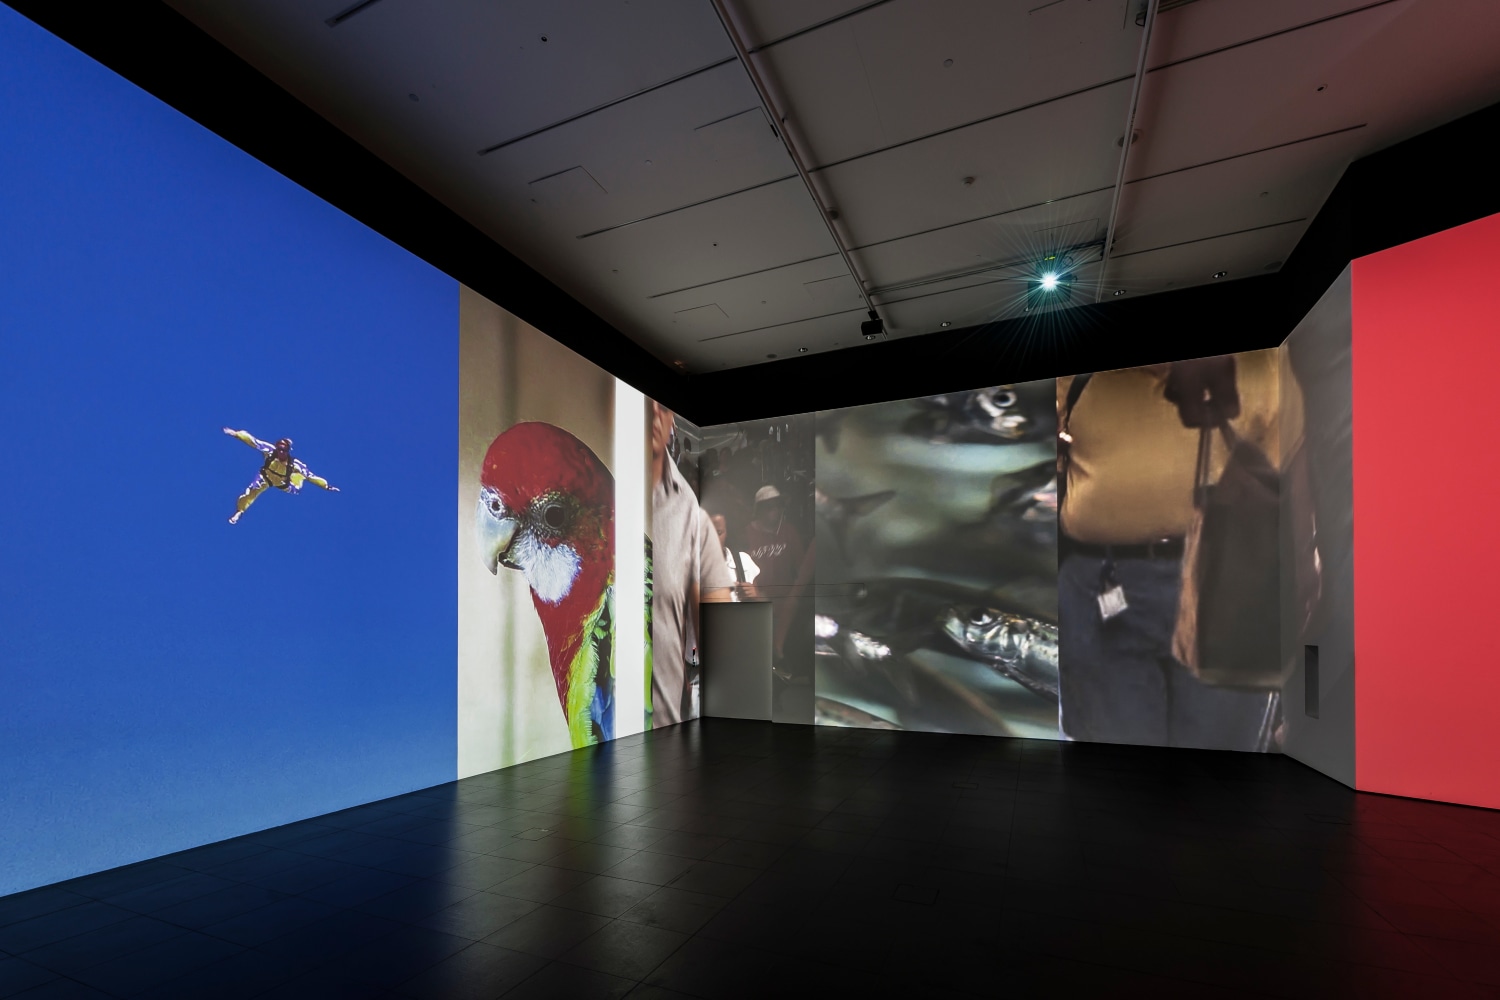 Charles Atlas
Glacier
Installation view at&amp;nbsp;Bloomberg Space, London, 2013